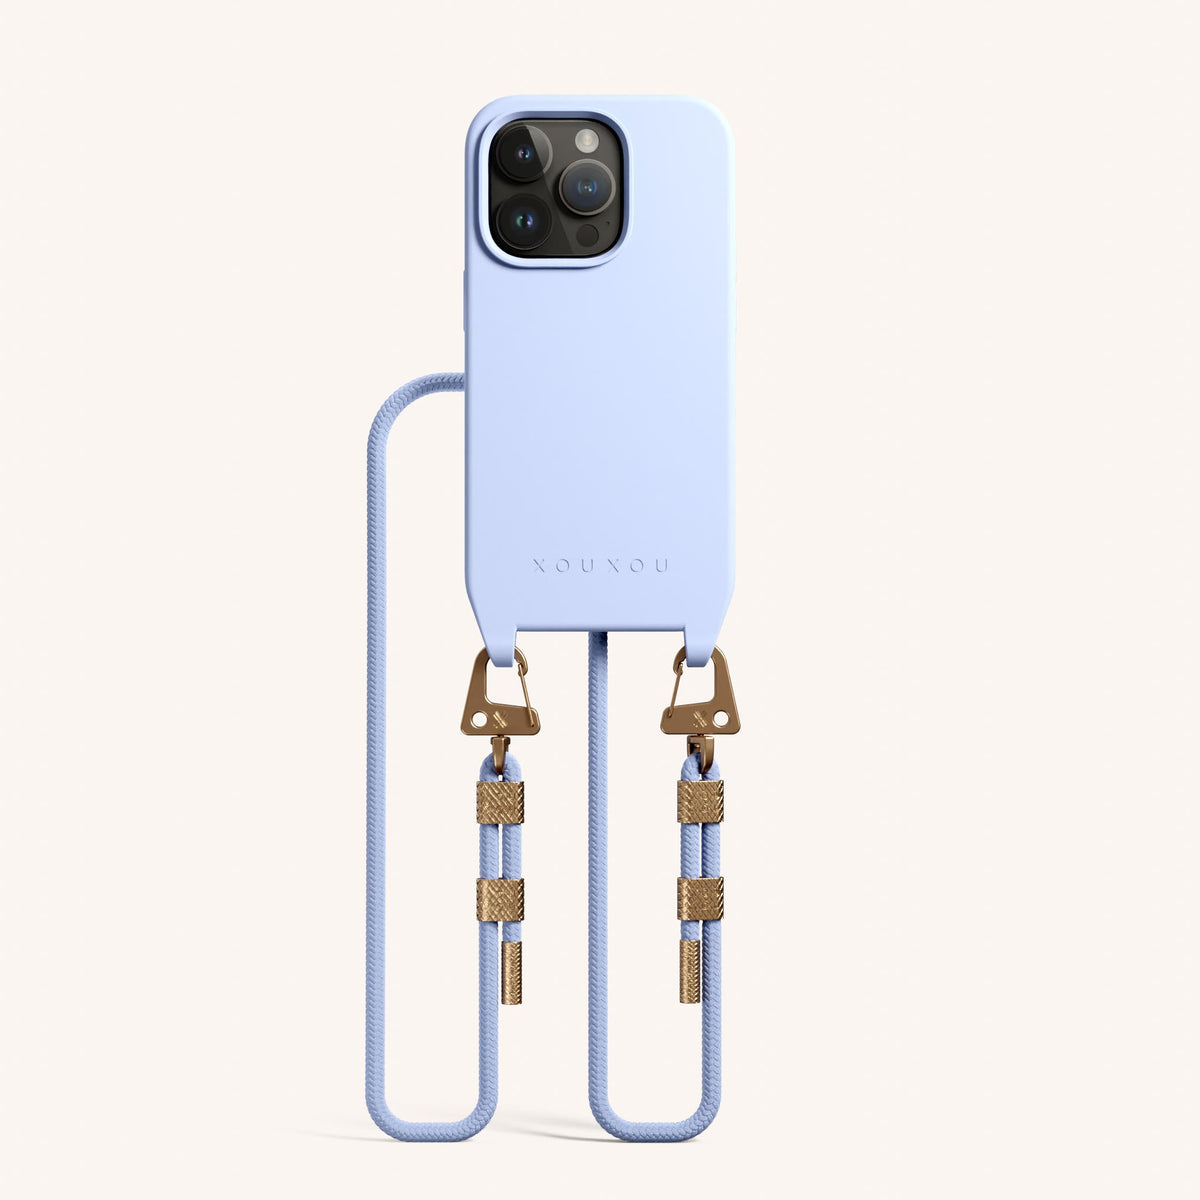 Phone Necklace with Carabiner Rope for iPhone 14 Pro with MagSafe in Baby Blue Total View | XOUXOU #phone model_iphone 14 pro